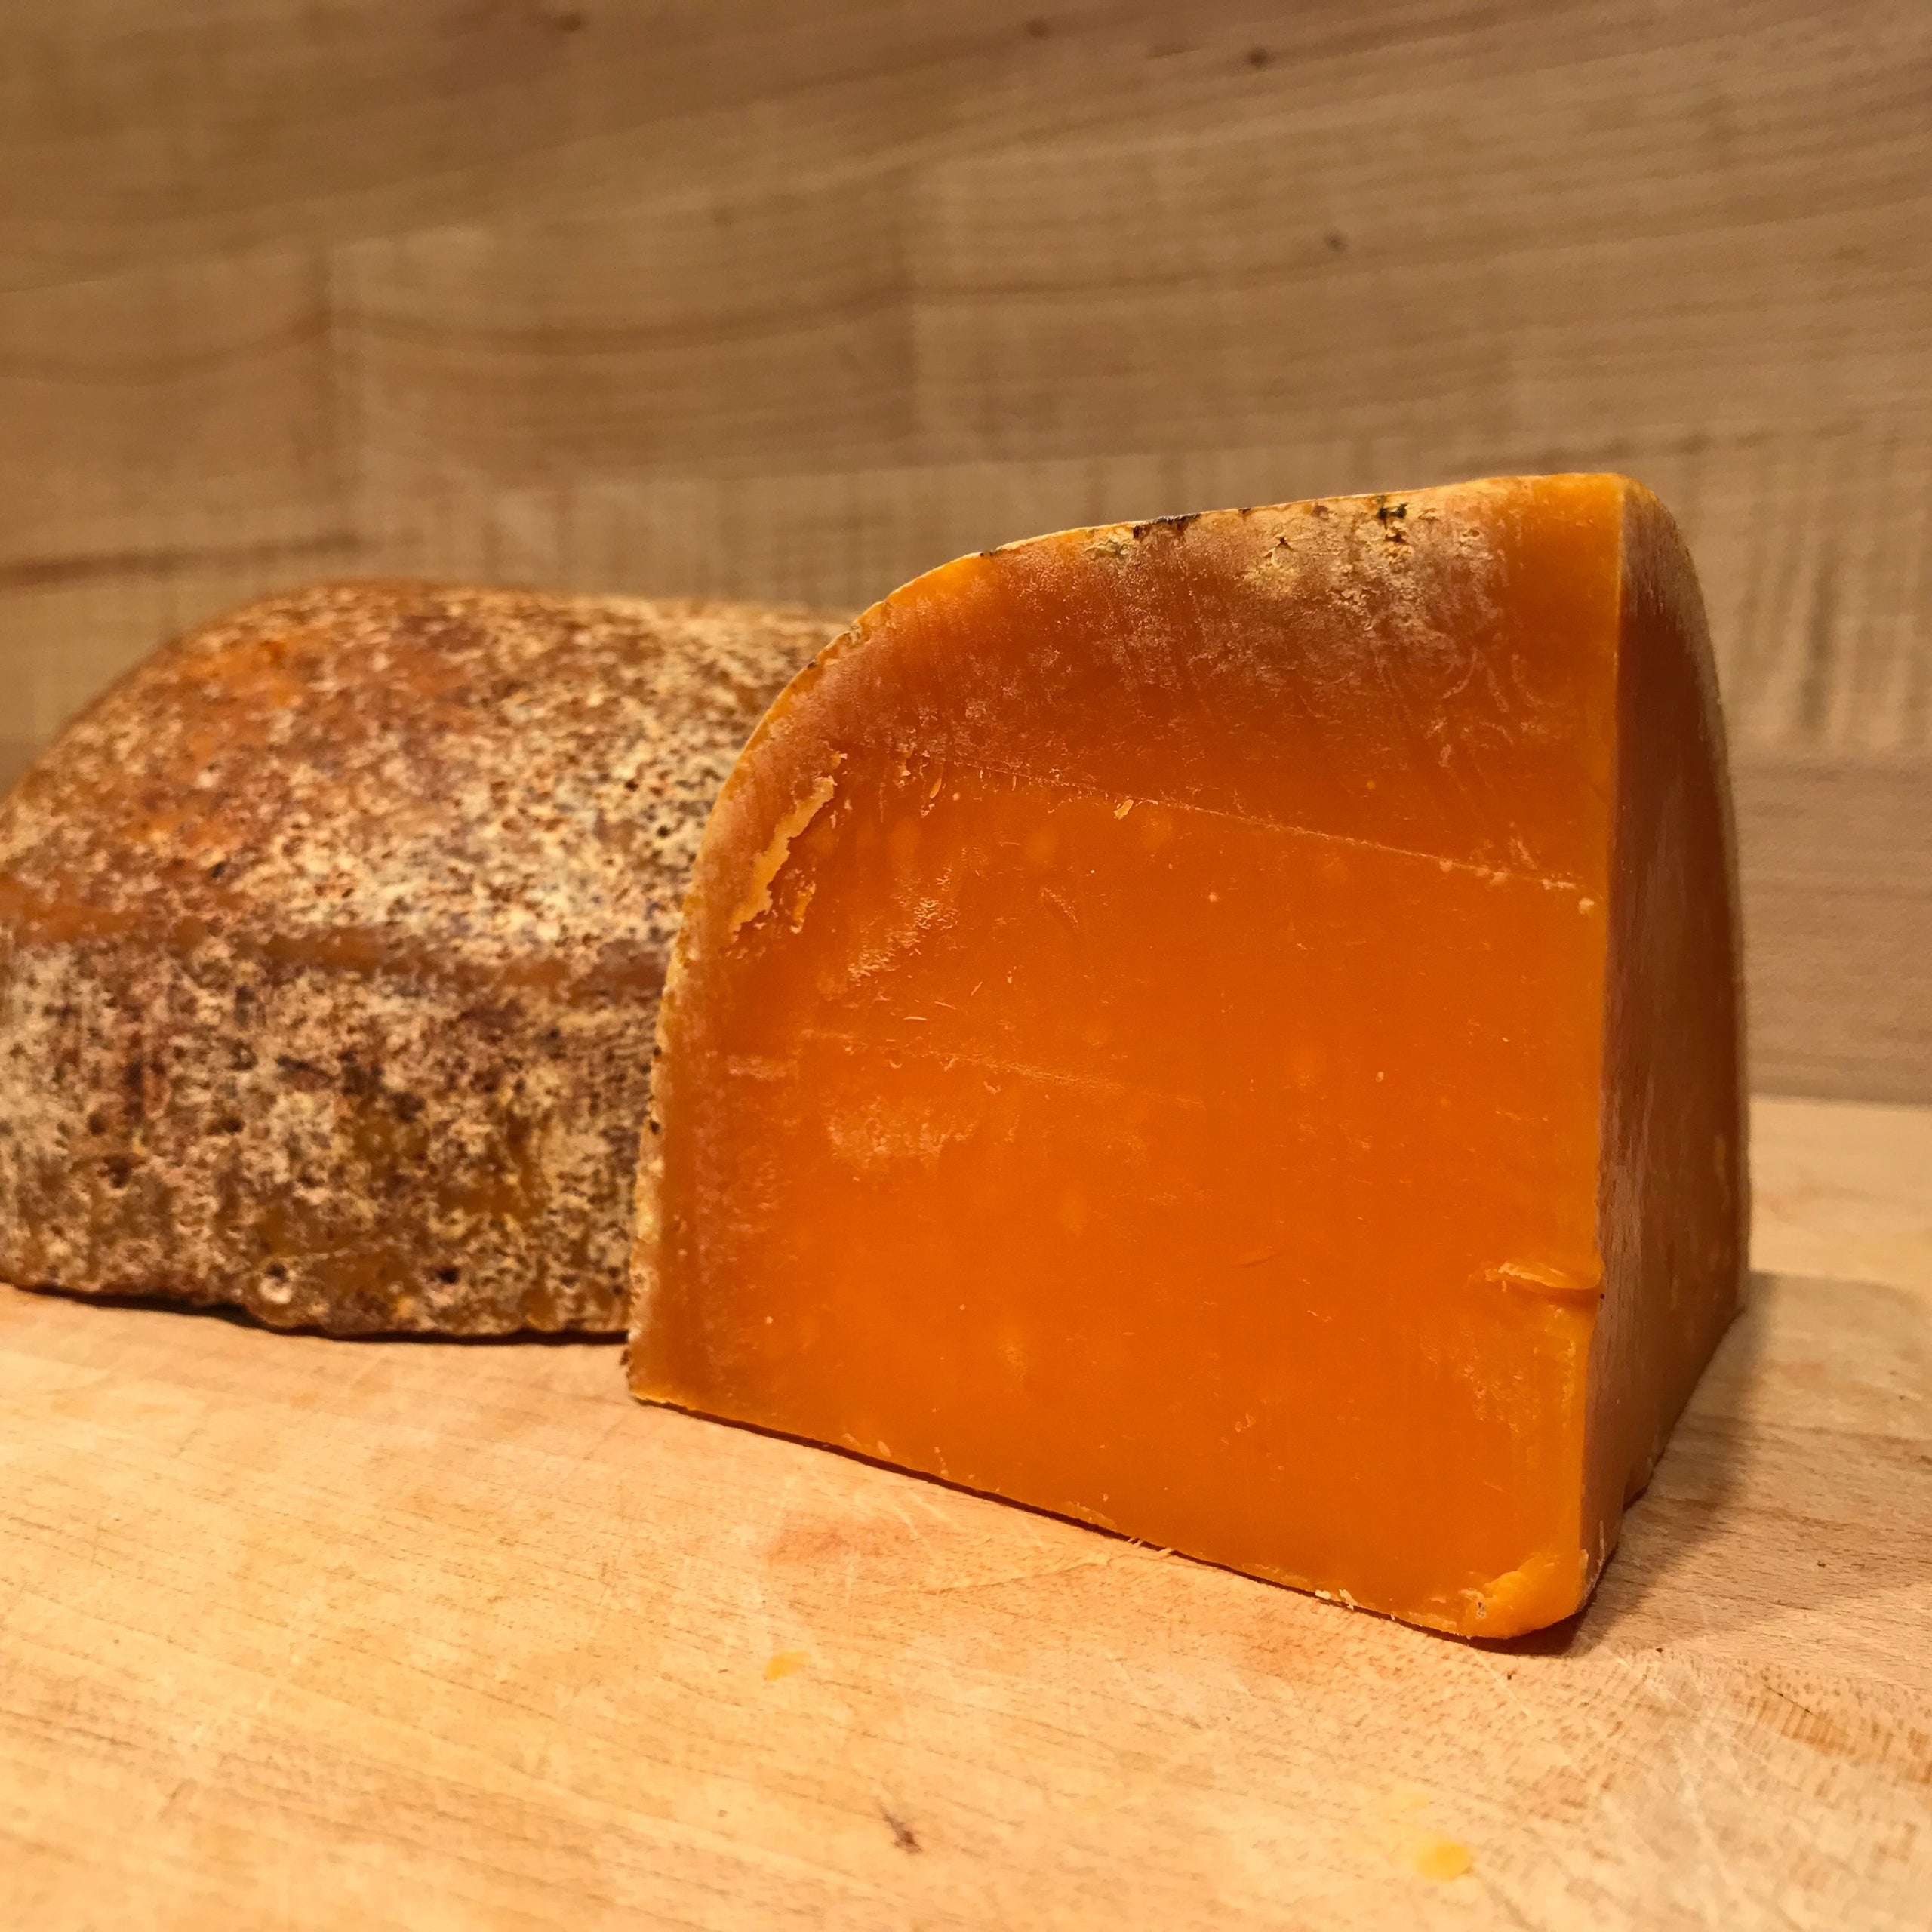 Extra Aged Mimolette The Cheese Shop Inc 